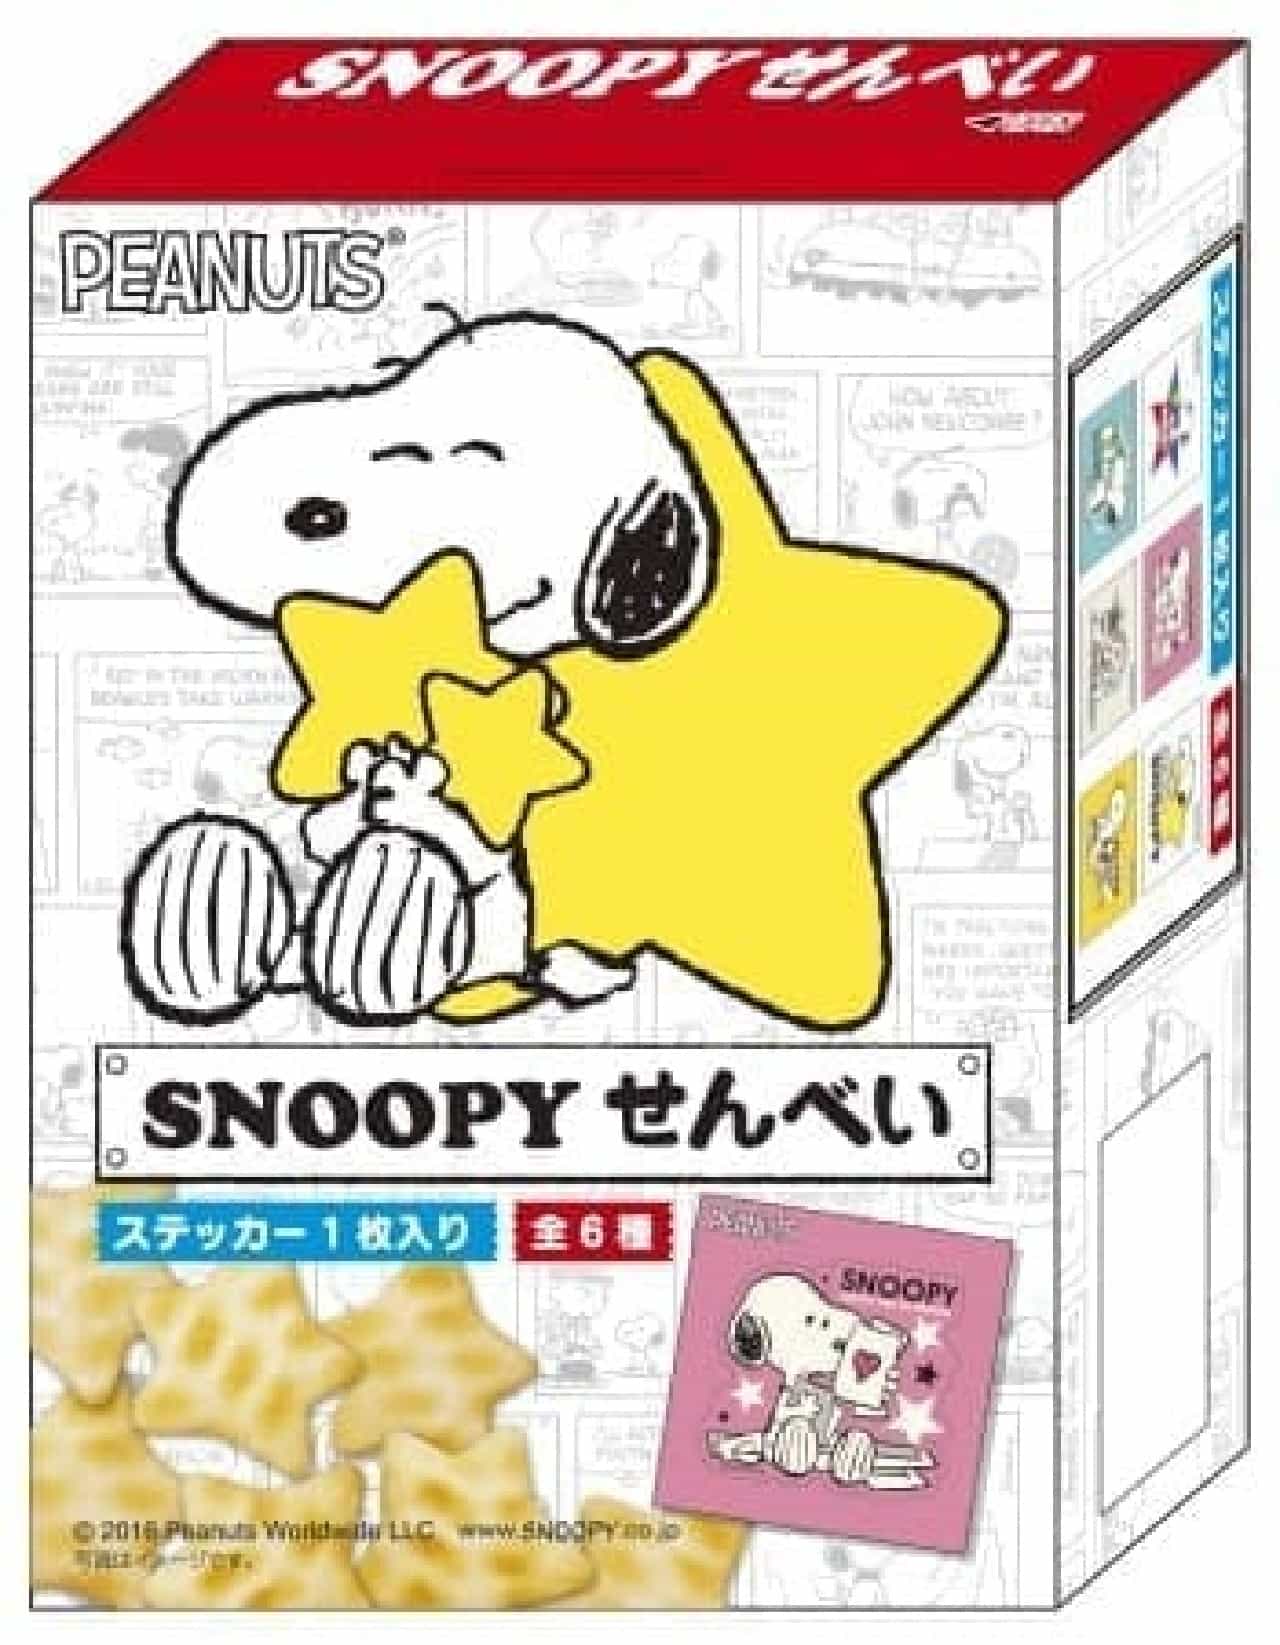 Lawson limited SNOOPY rice crackers